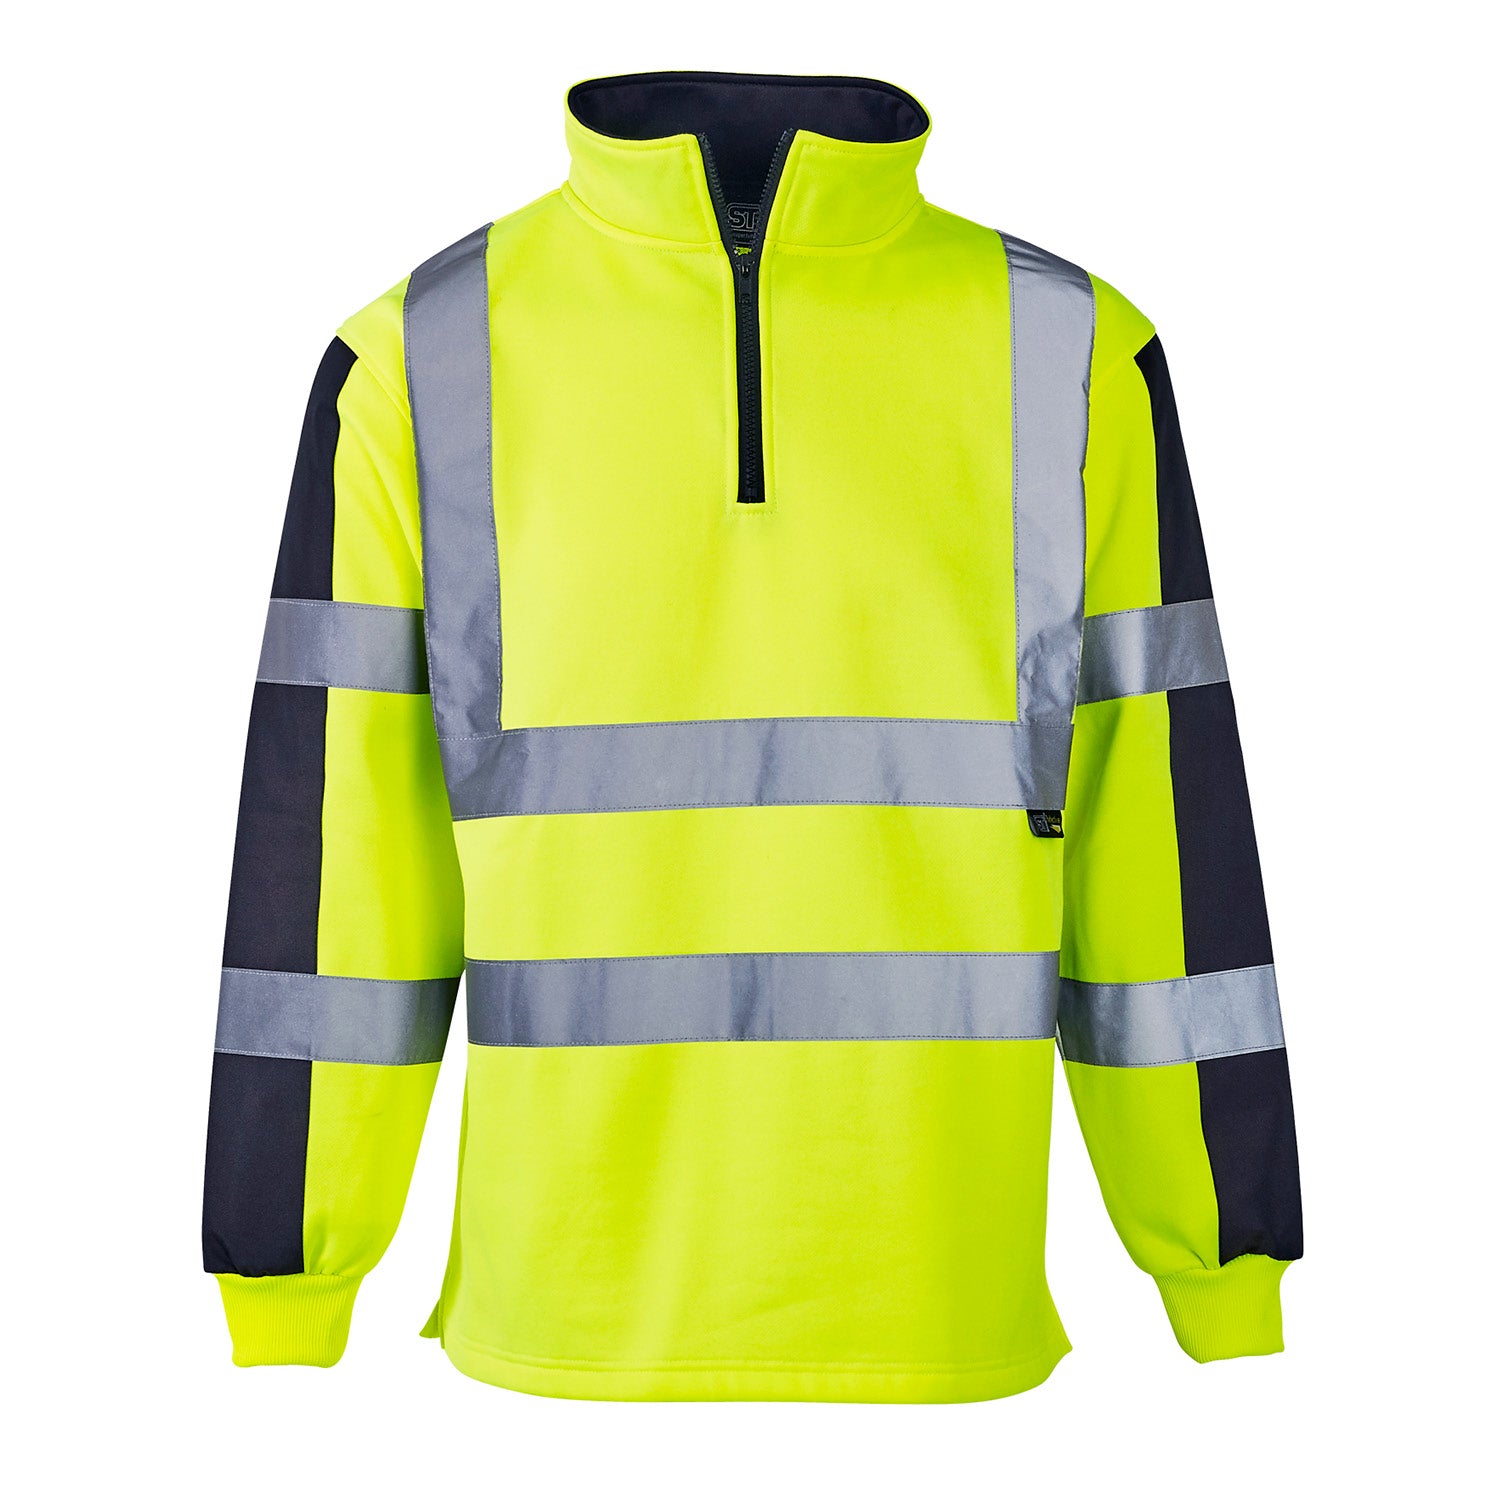 Supertouch Hi Vis 2 Tone Orange Rugby Shirt -Yellow/Navy